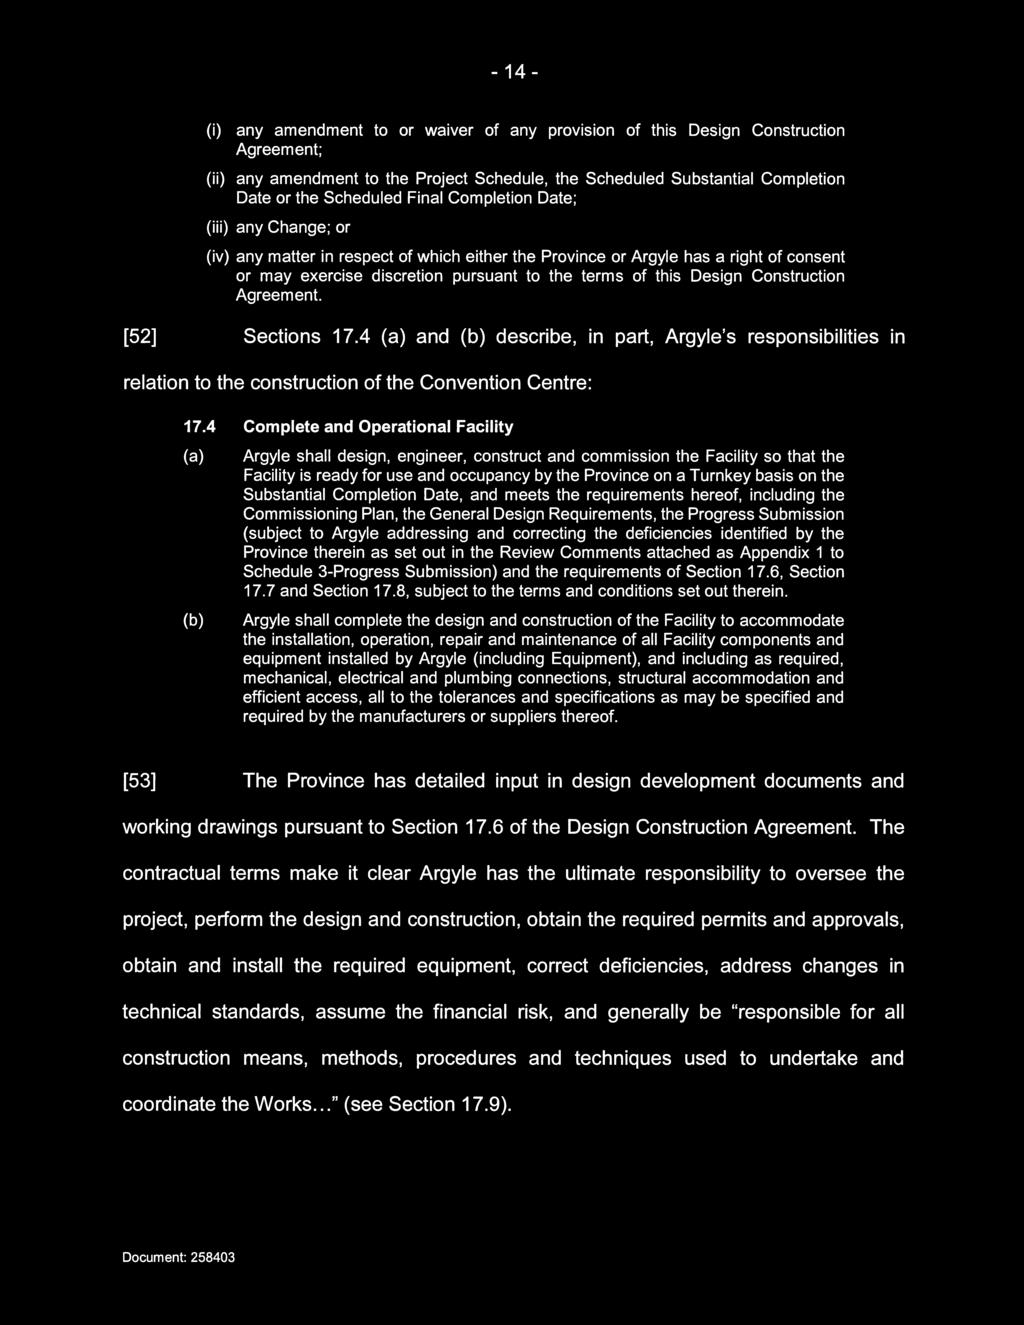 Construction Agreement. [52] Sections 17.4 (a) and (b) describe, in part, Argyle s responsibilities in relation to the construction of the Convention Centre: 17.